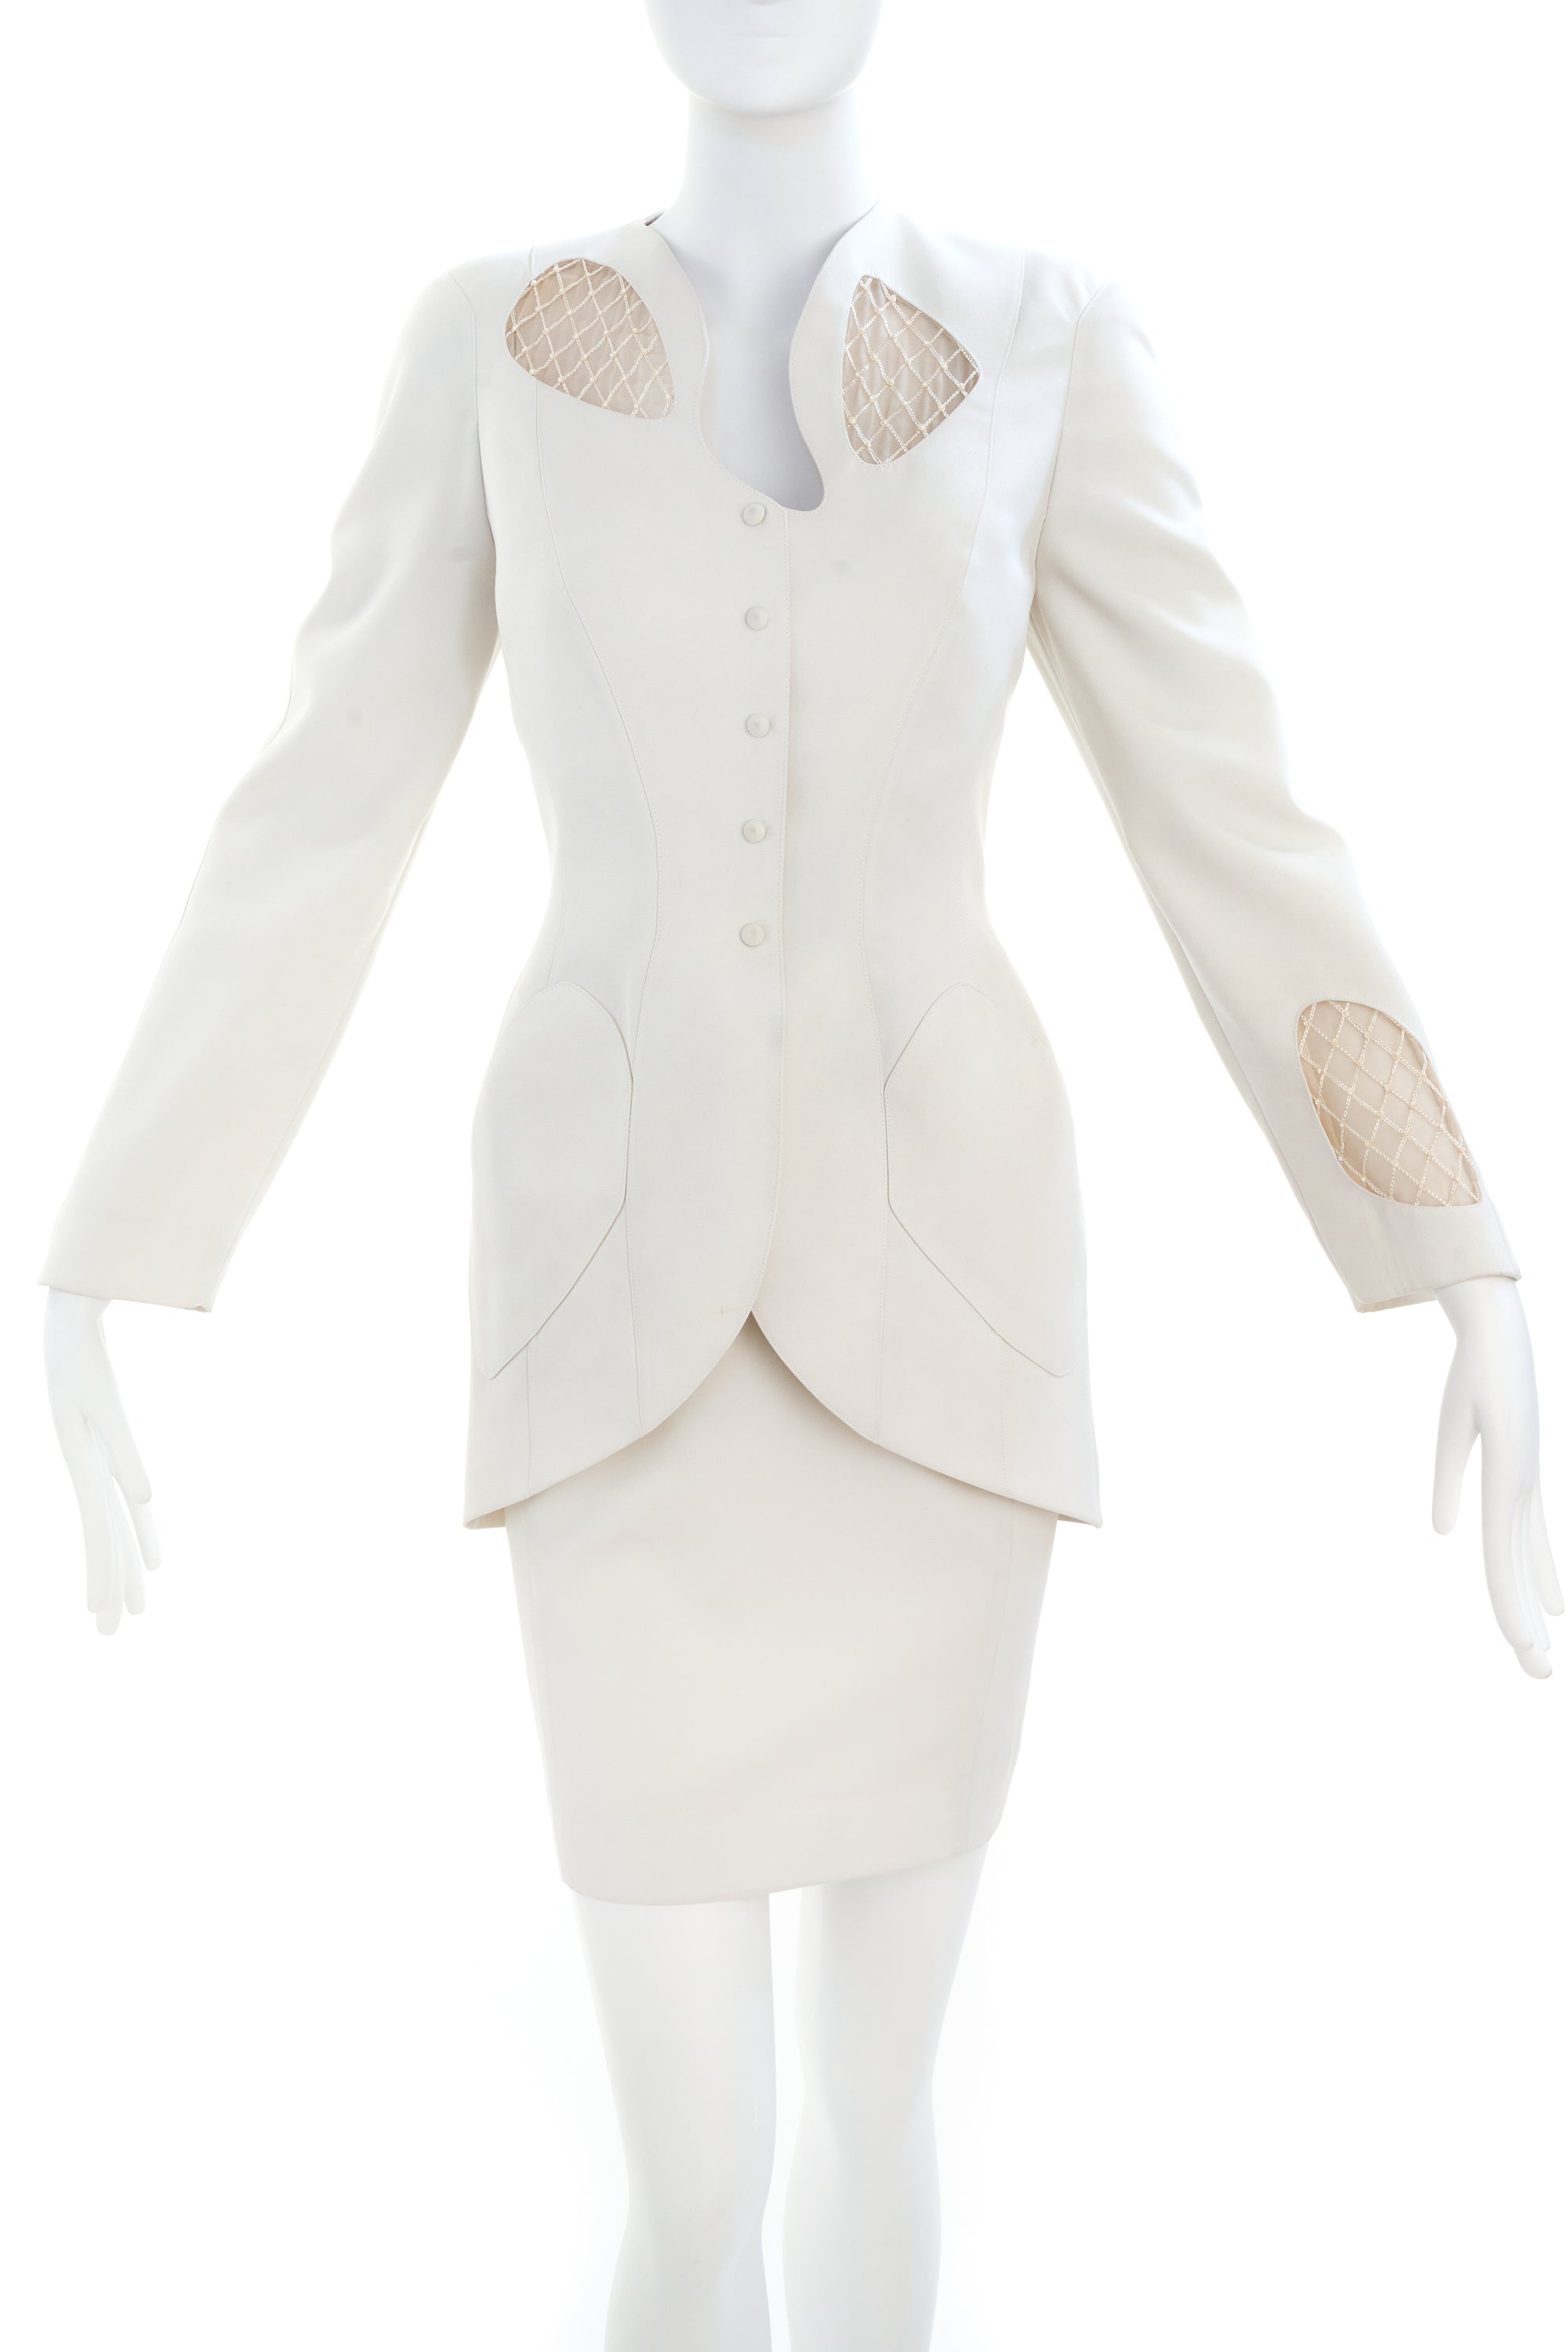 Theiry Mugler White Suit Set with Lattice Cutout Size 38